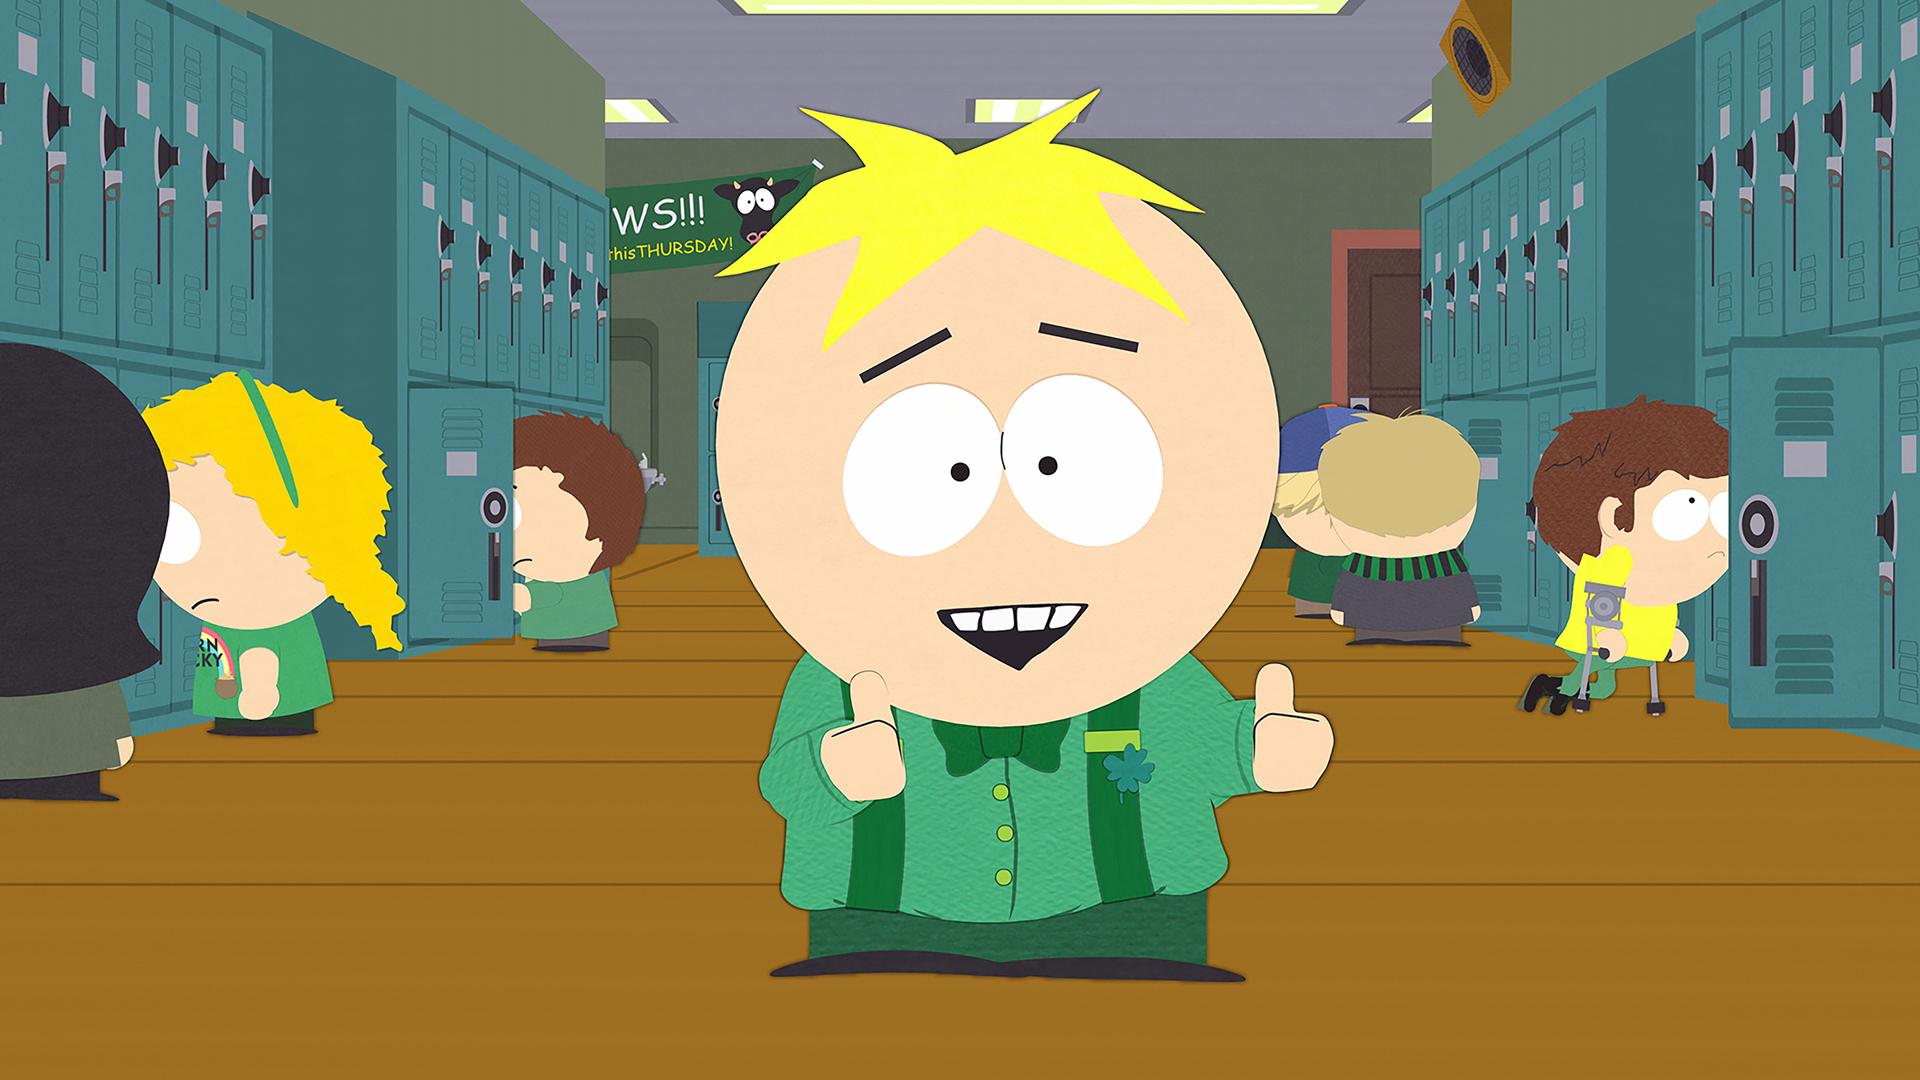 Butters queefed on